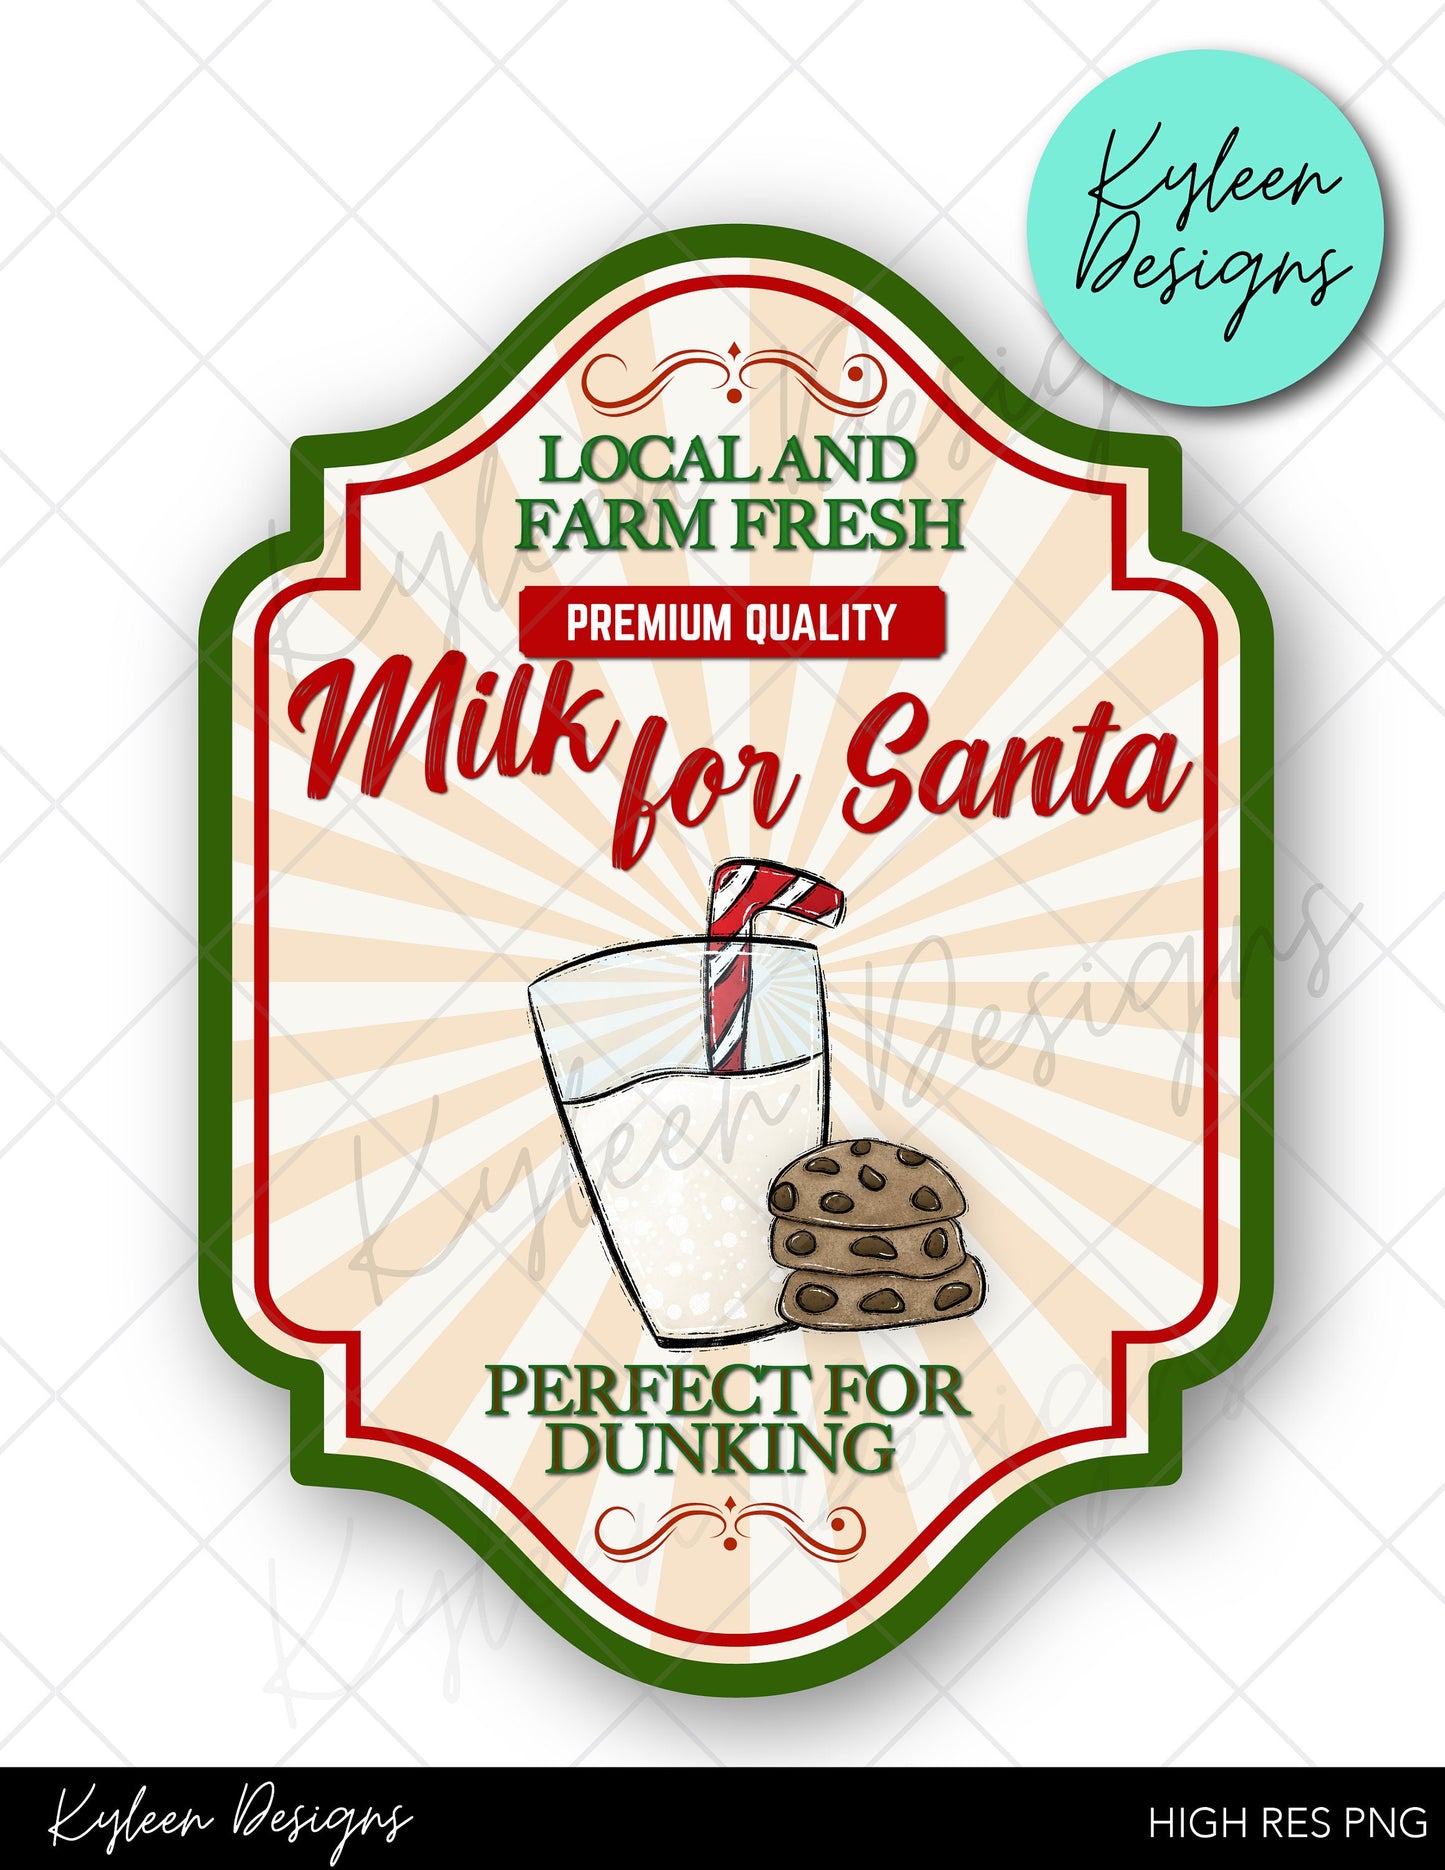 Milk for Santa label High RES PNG for coffee/beer glass